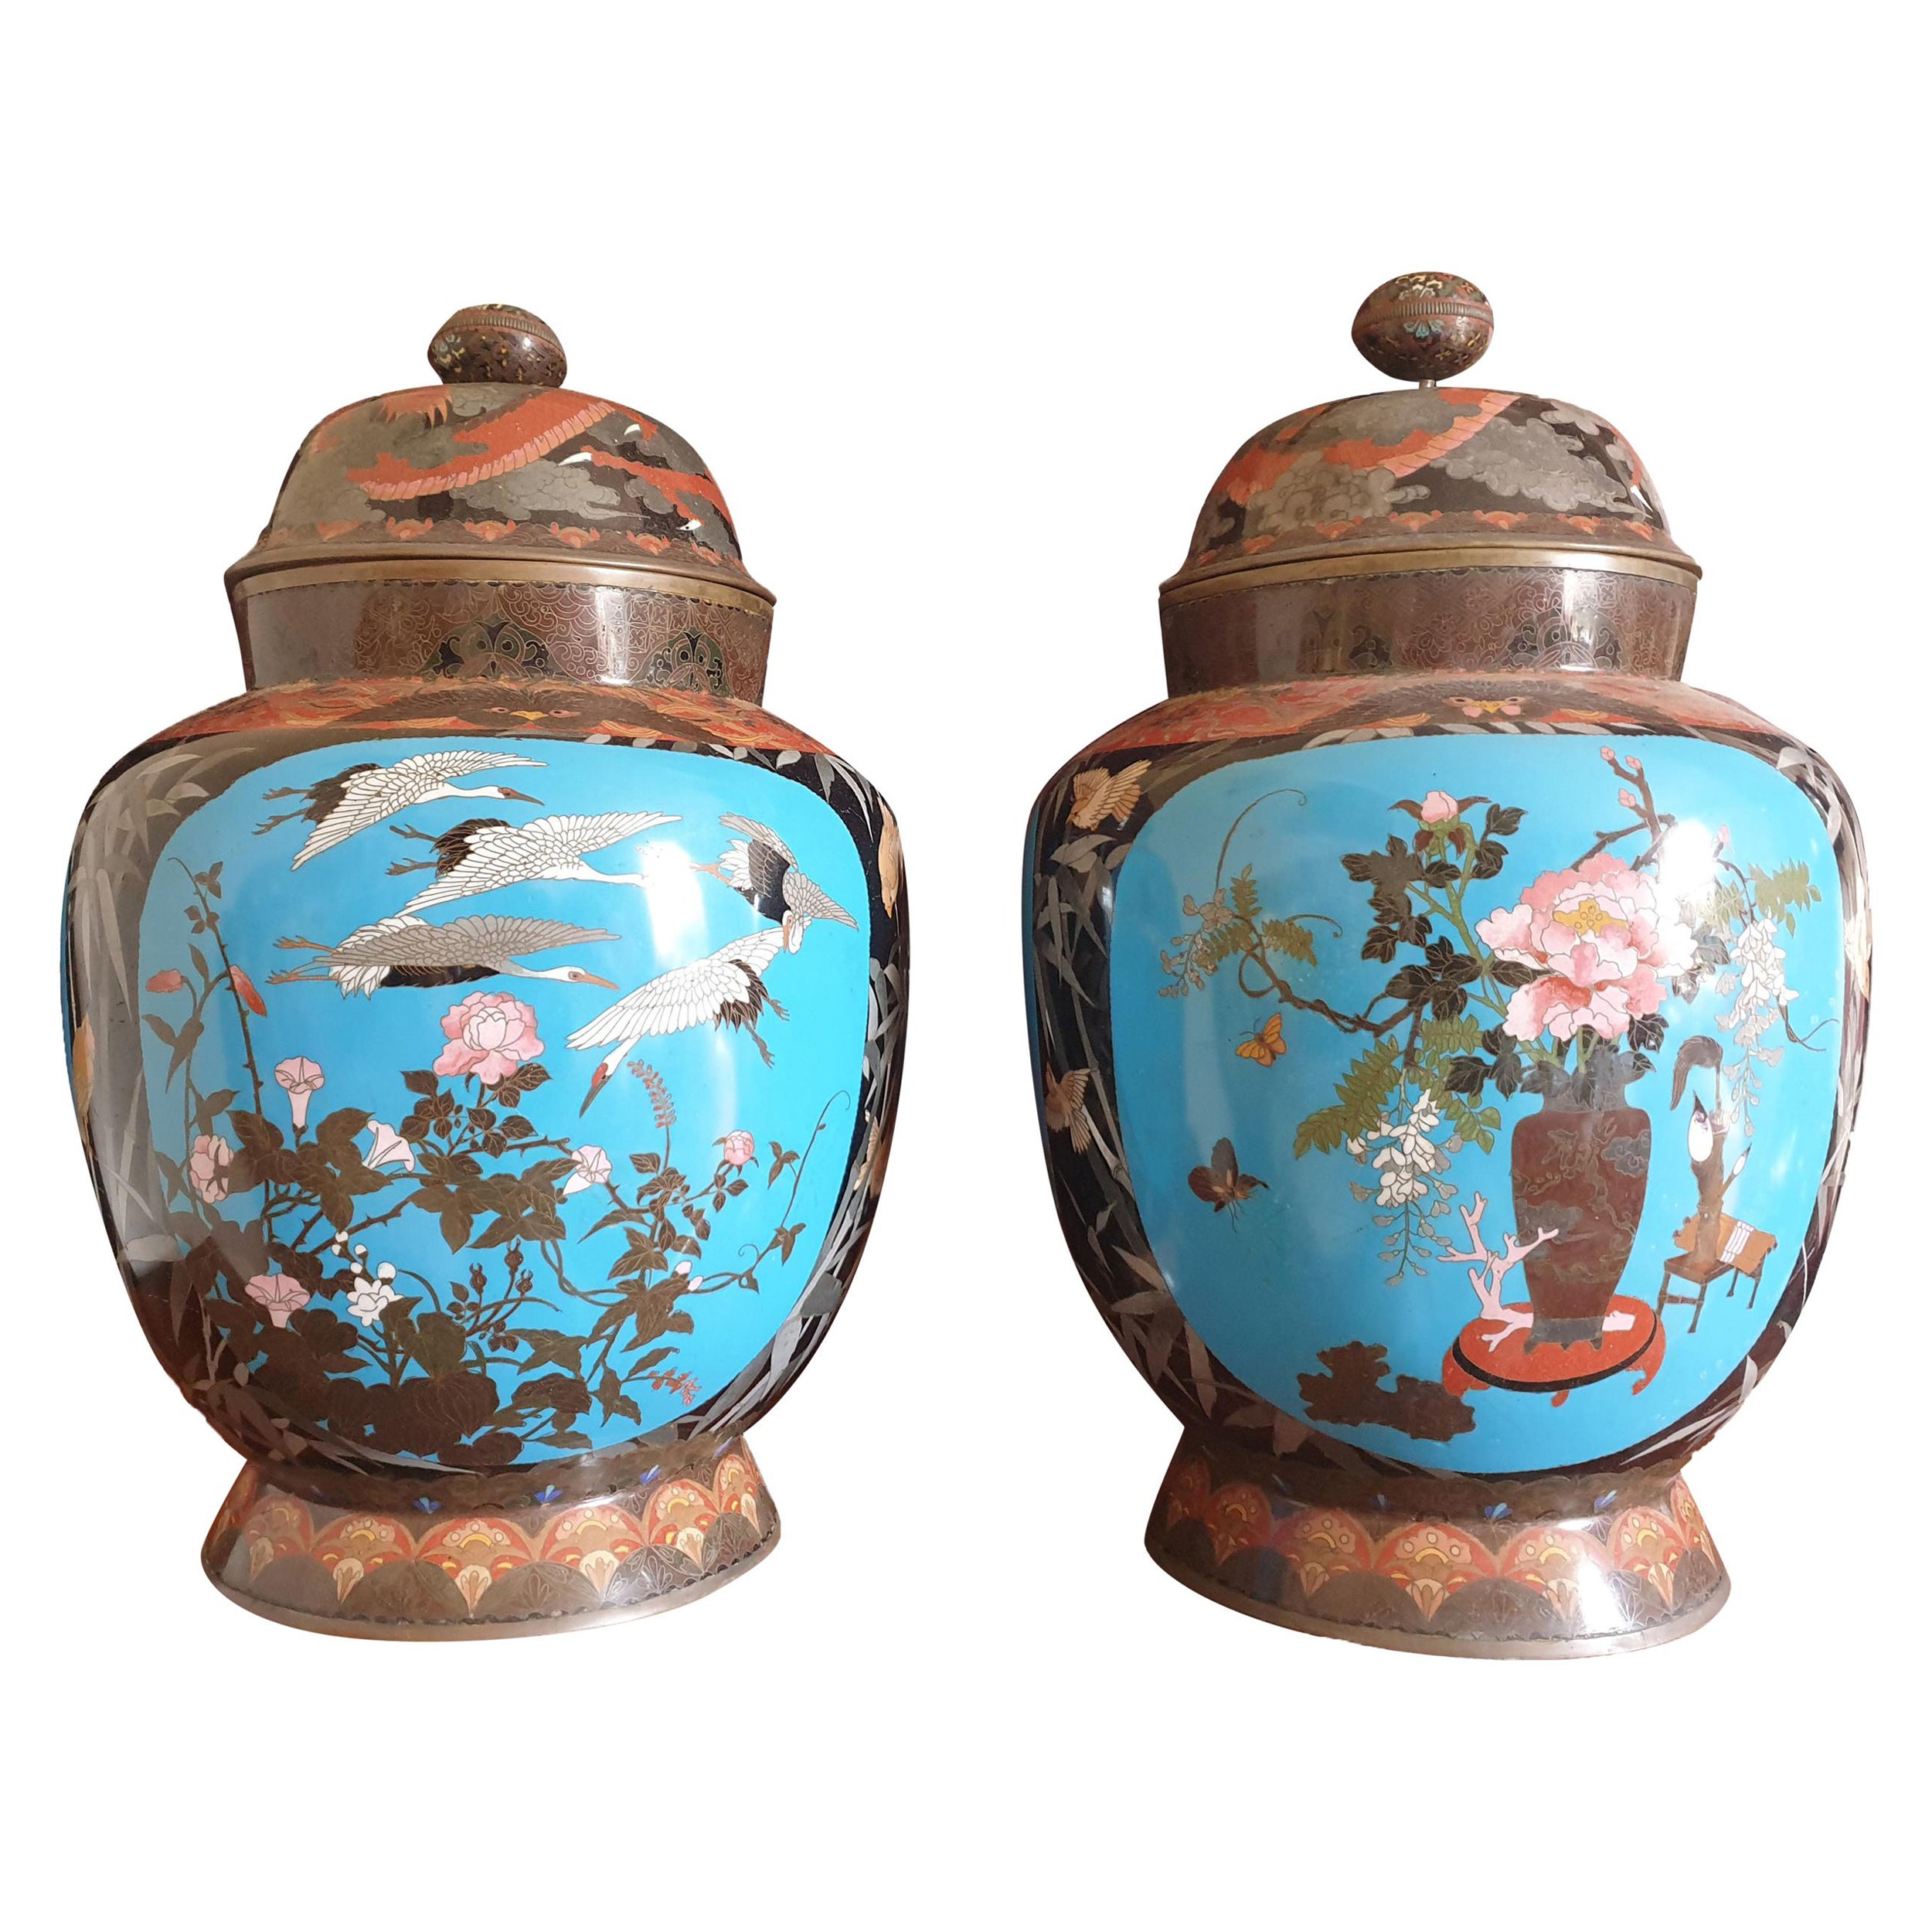 Japanese Meji Period Cloisonné Crane & Bamboo Vases with Scenes of Nature For Sale